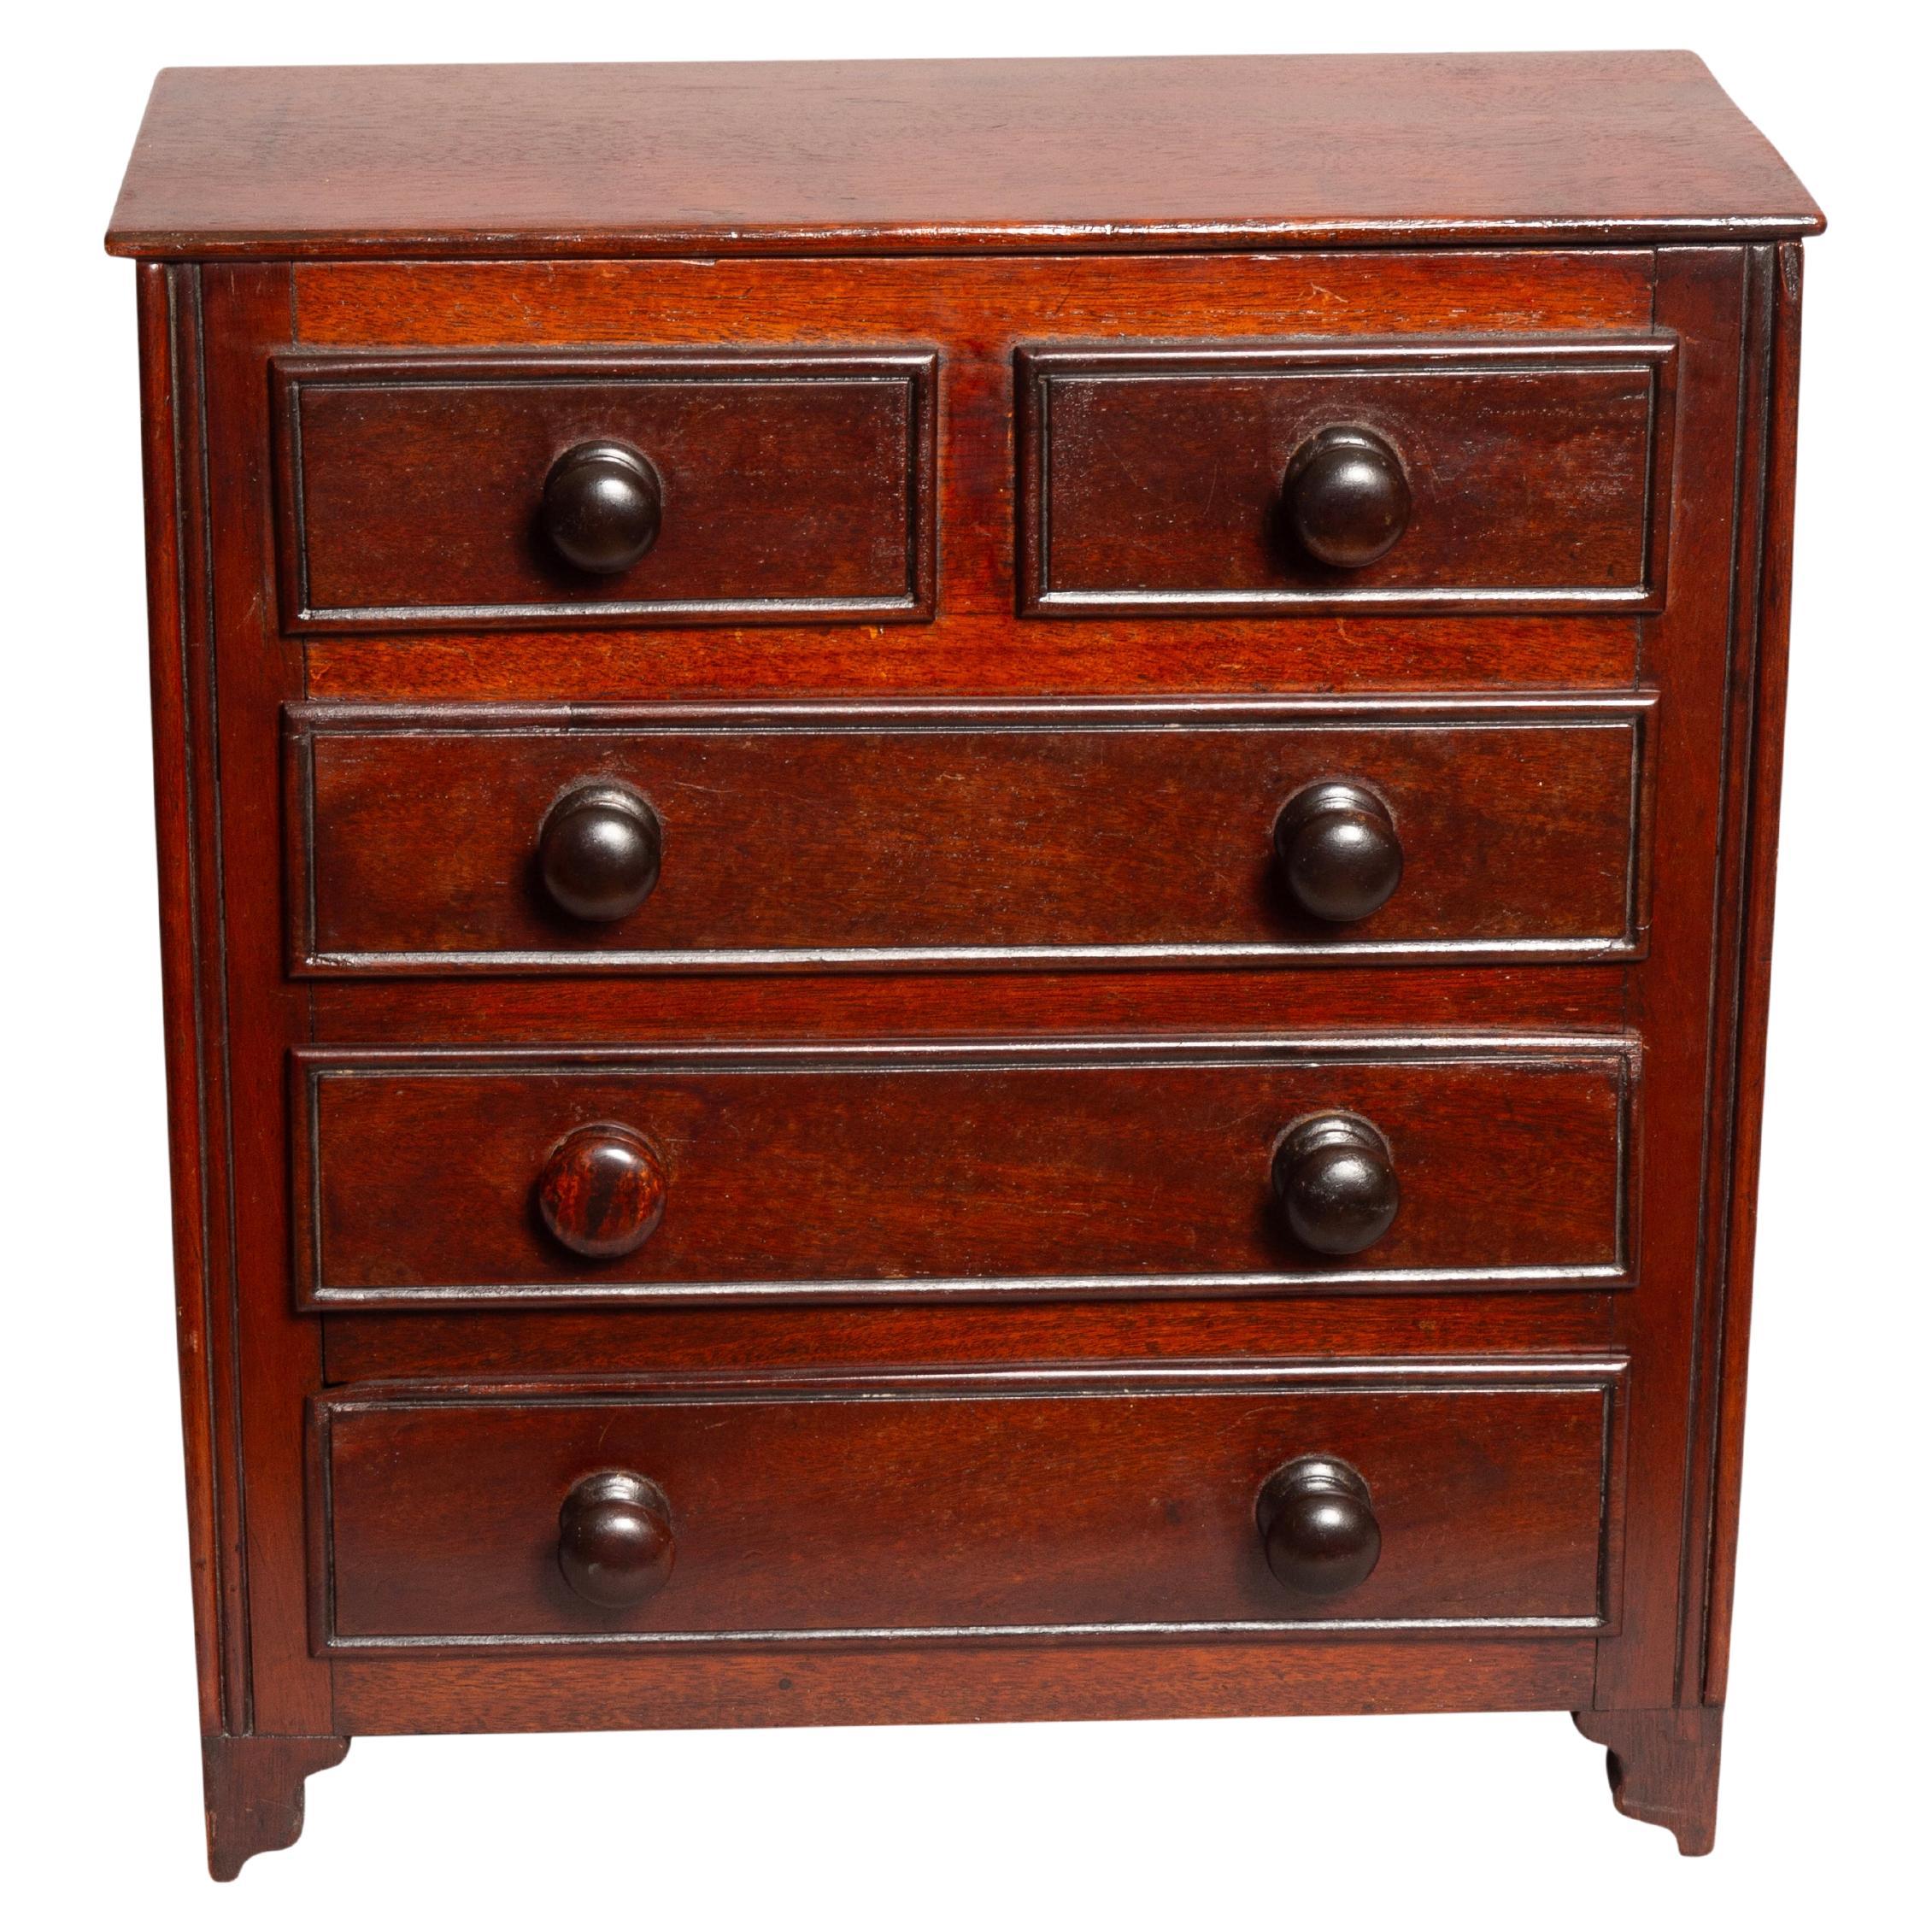 Late Georgian Mahogany Box In The Form Of A Chest For Sale